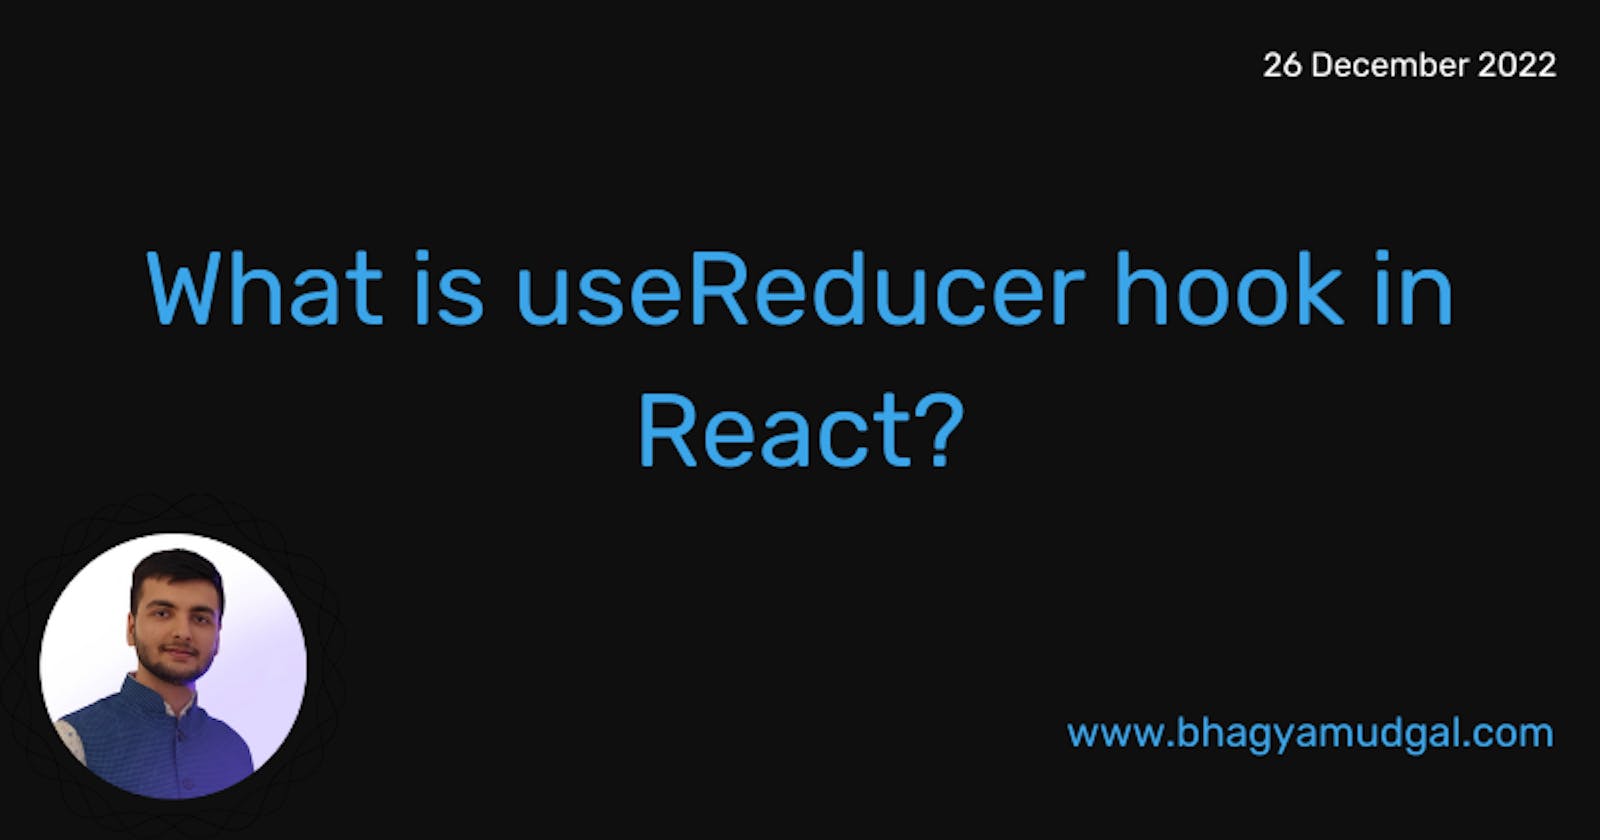 What is useReducer hook in React?